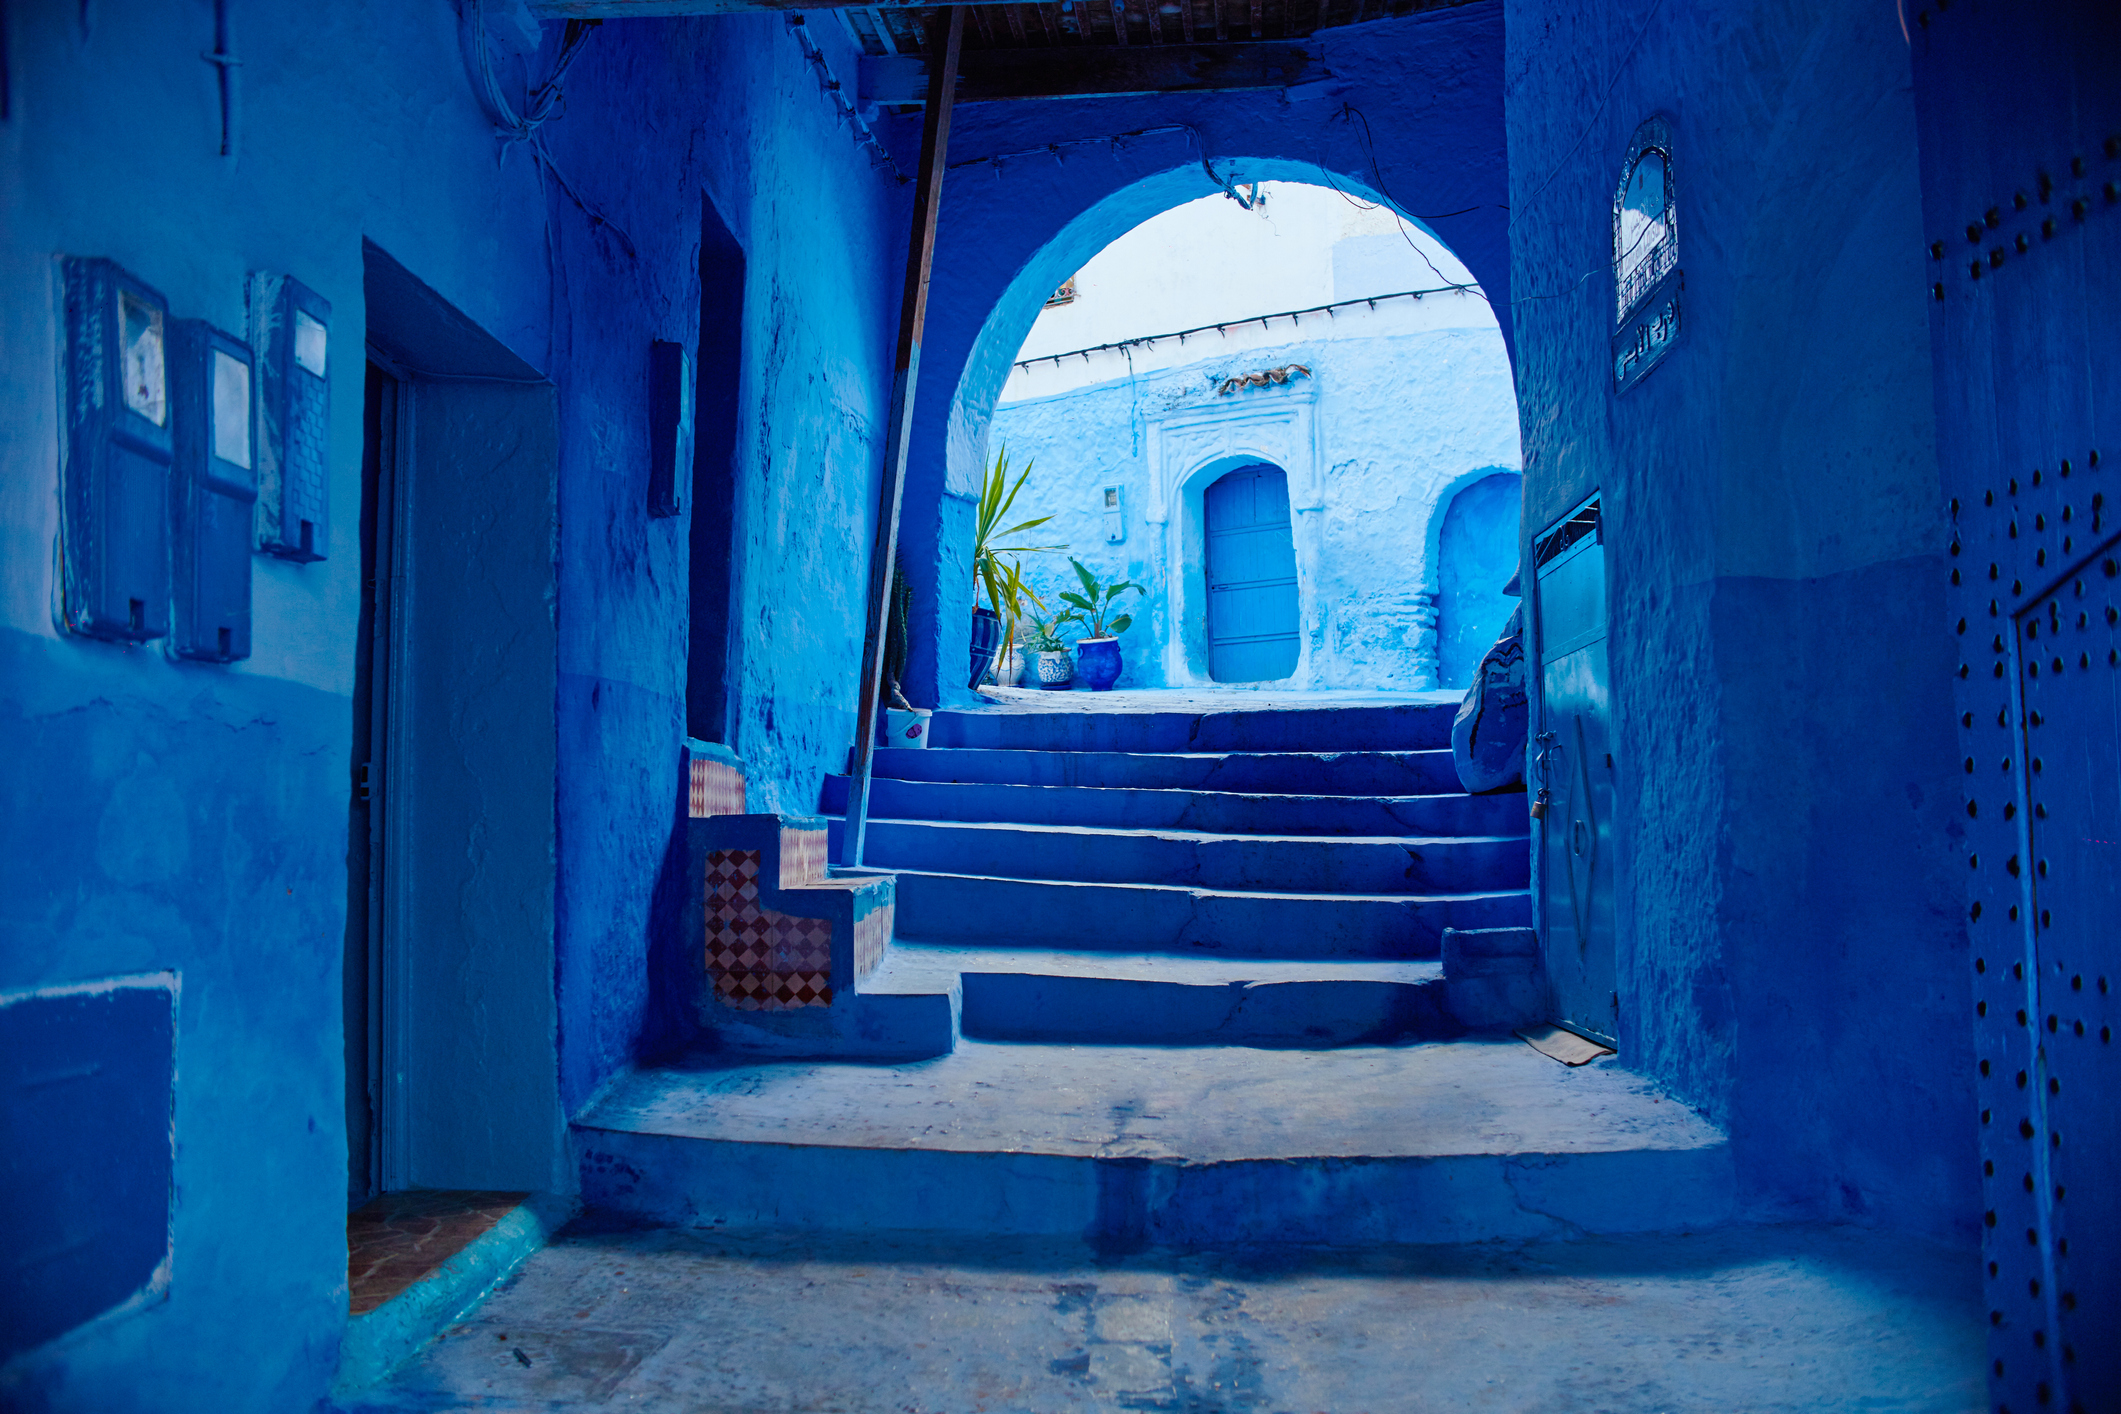 Morocco is the blue city of Chefchaouen, endless streets painted in blue color. Lots of flowers and Souvenirs in the beautiful streets of Chefchaouen. A magical fairy-tale city of heavenly color